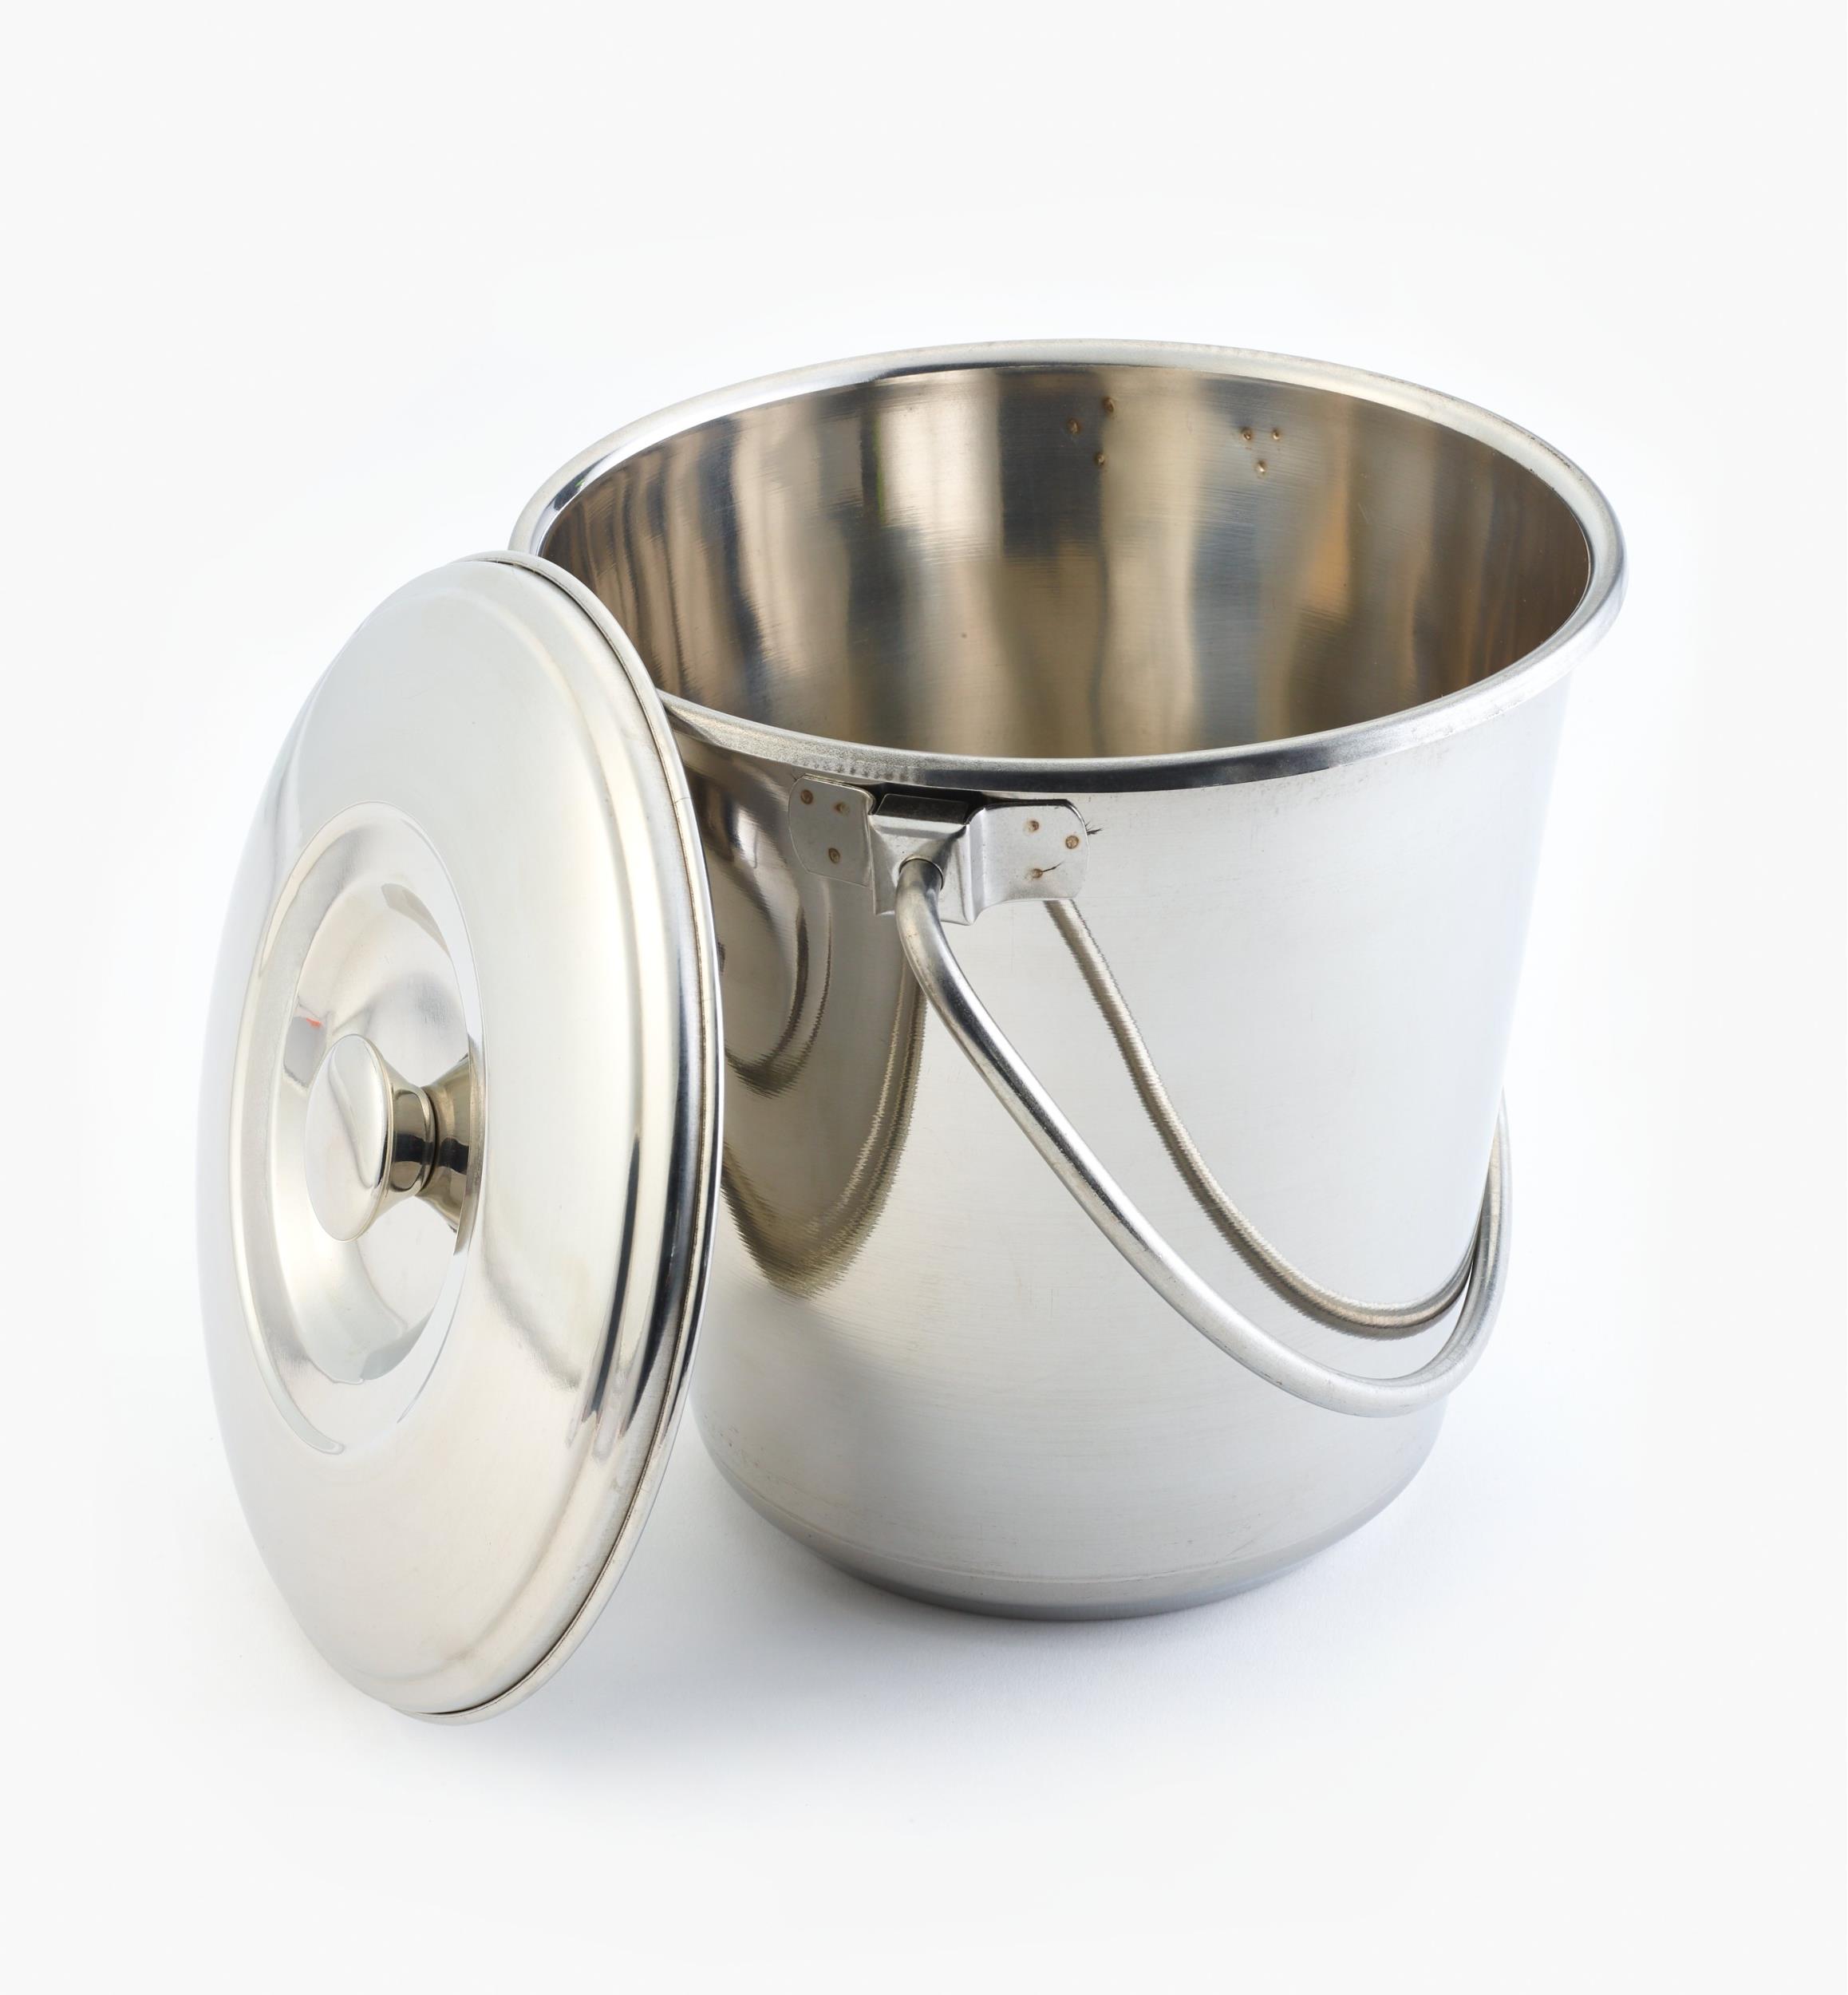 https://assets.leevalley.com/Size5/10082/XG155-stainless-steel-compost-pail-4-litres-f-03.jpg